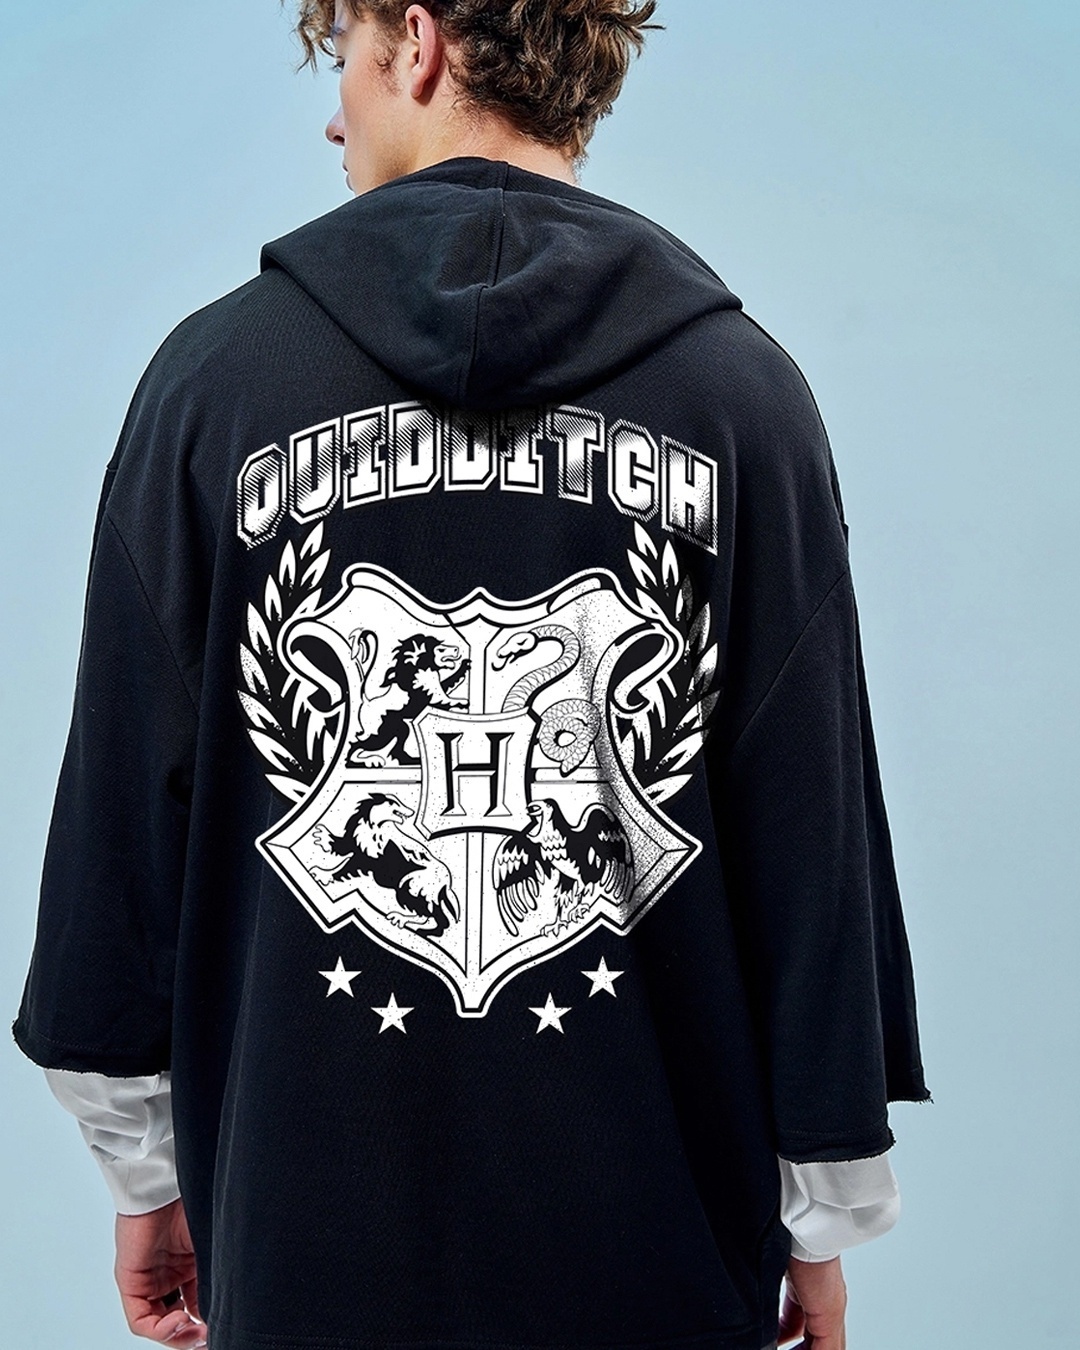 Men's Black Seeker Graphic Printed Super Loose Fit Hoodies to ace skater boy style